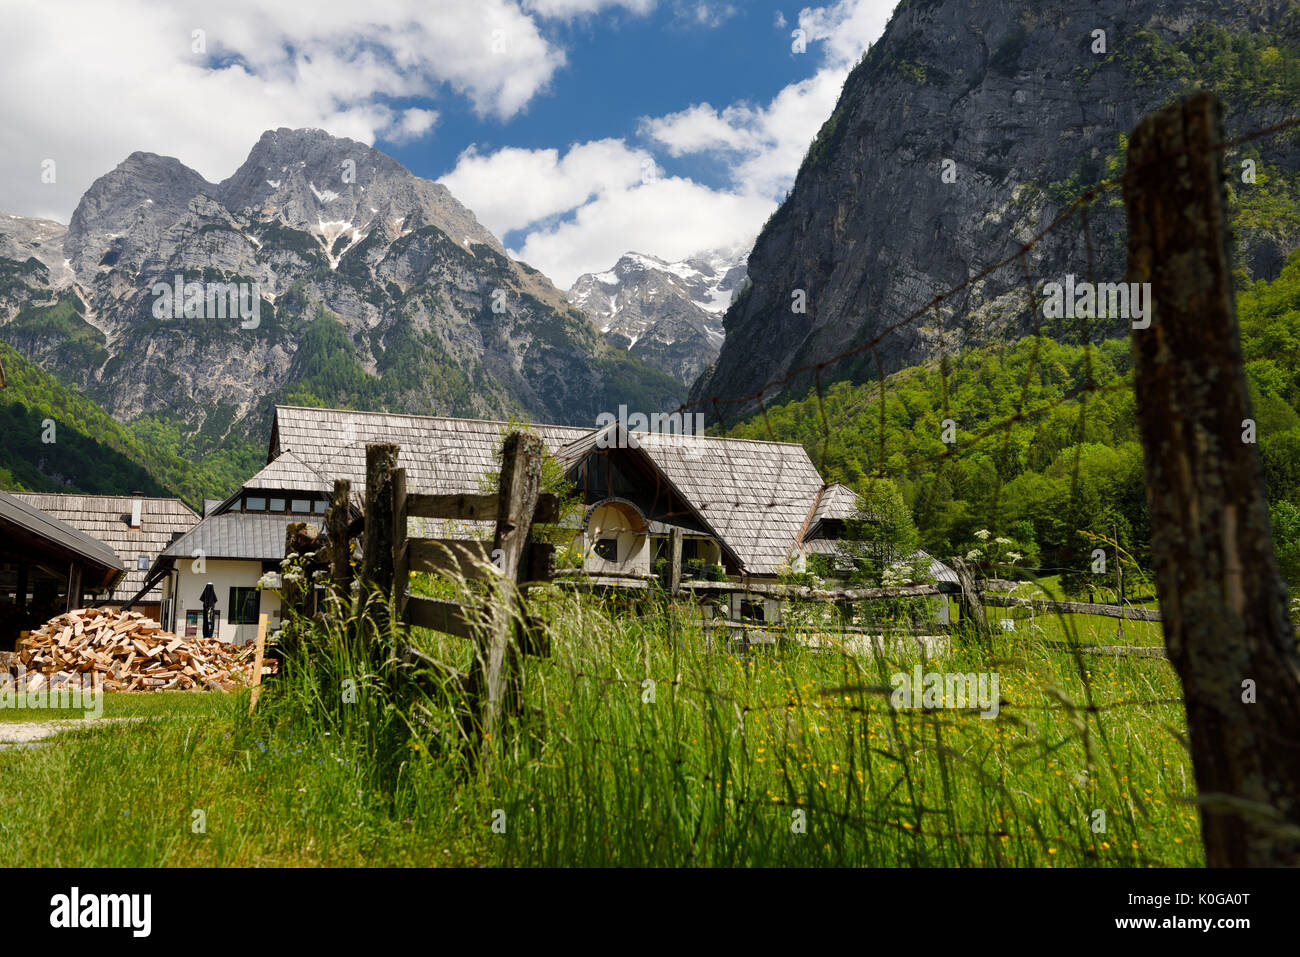 Tourist information center and firewood and fence in alpine village of Trenta with Pihavec peak Triglav National Park Slovenia Stock Photo